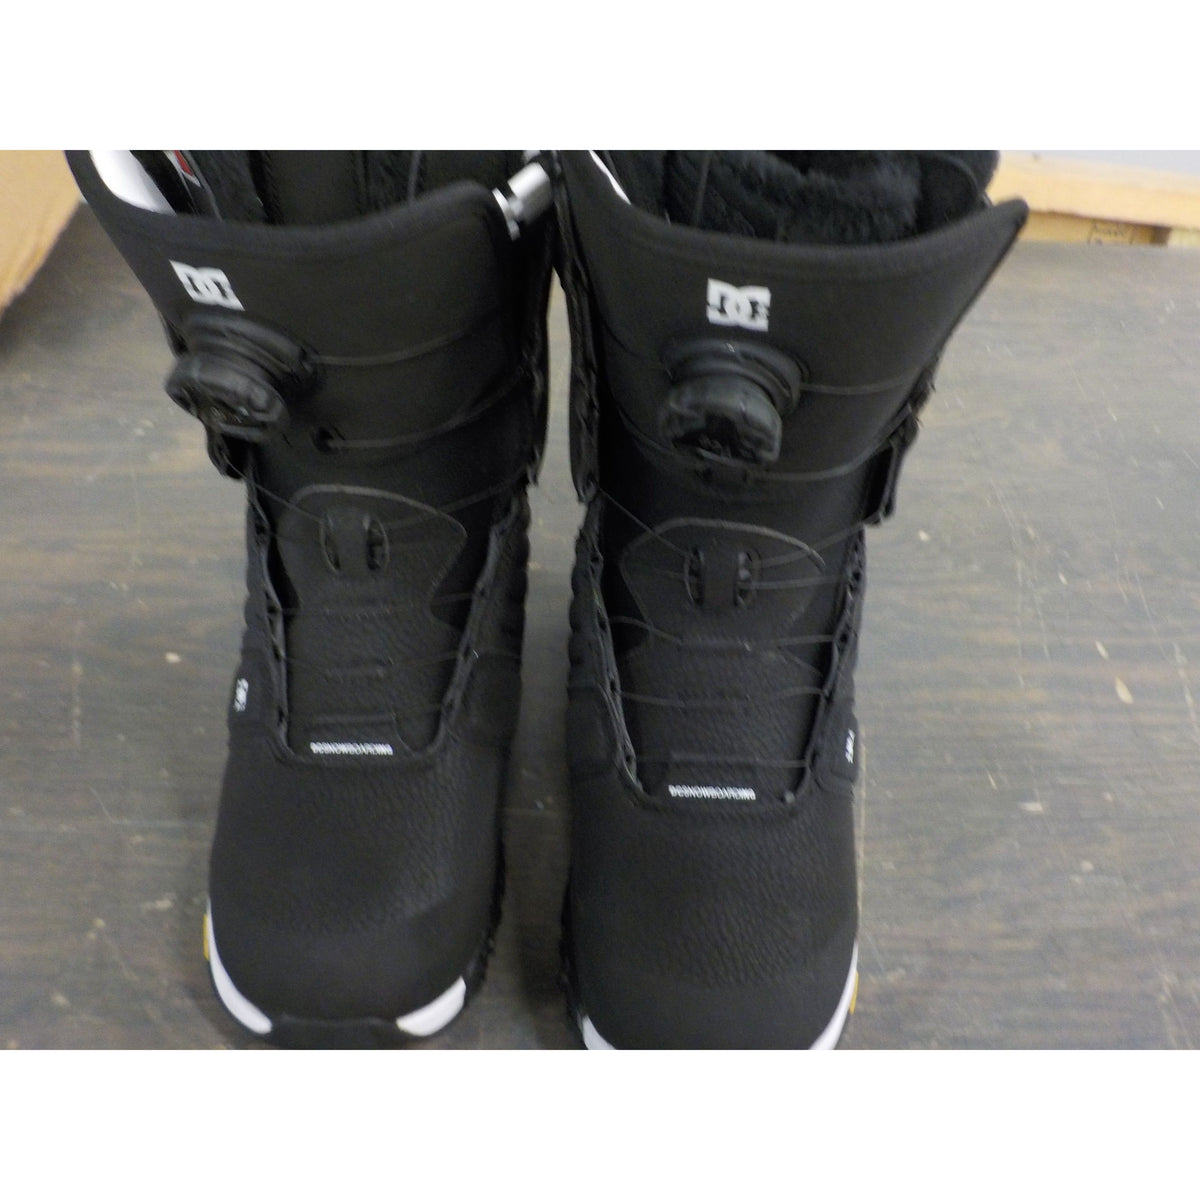 DC Men&#39;s Judge Step On Boa Snowboard Boots - Black - 8.5 - Used - Acceptable